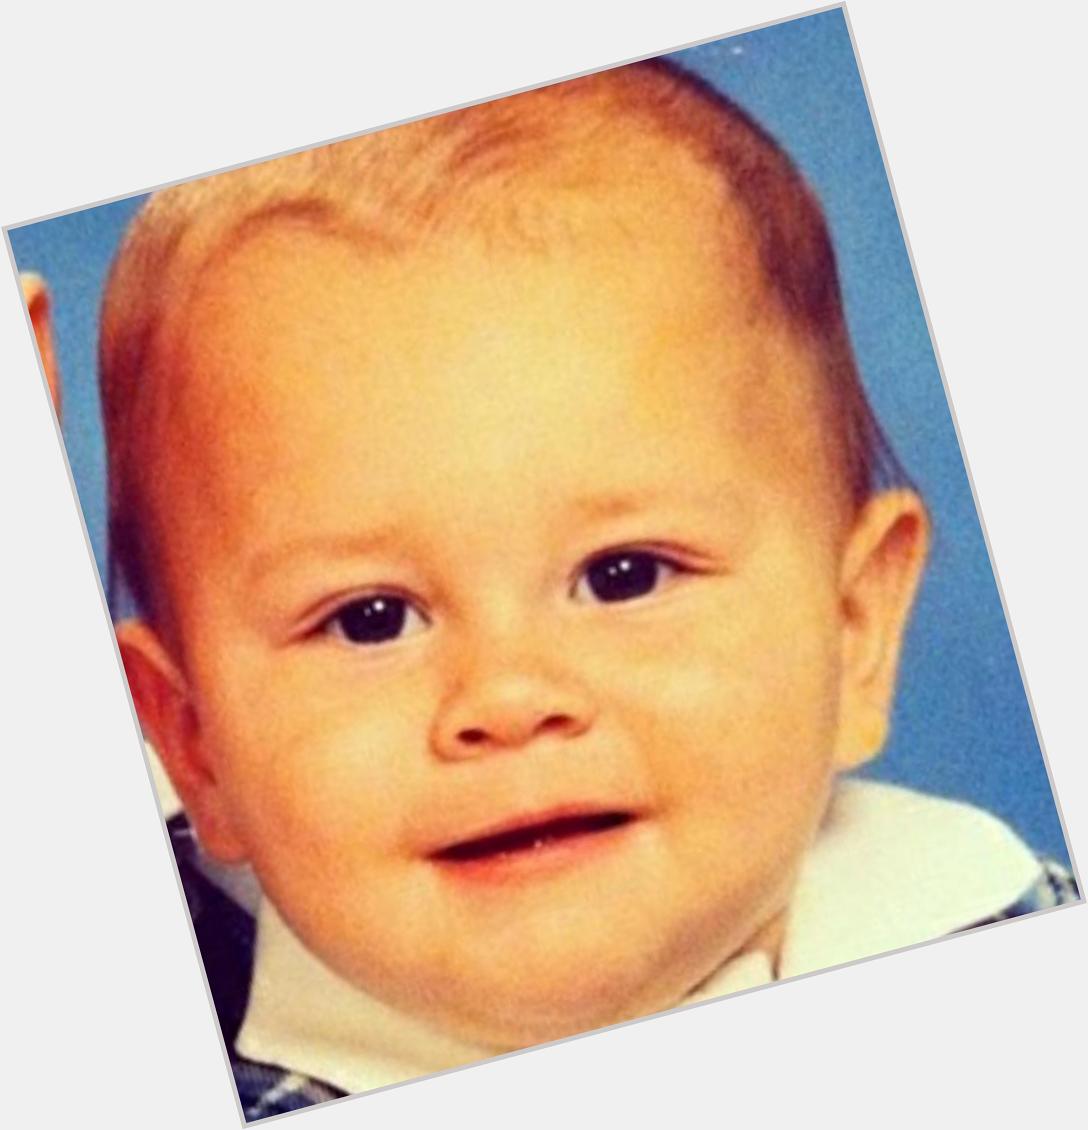   BYECassey21: Happy 1st Birthday to Riley McDonough!  What a cute baby 
RileyMcDonough 